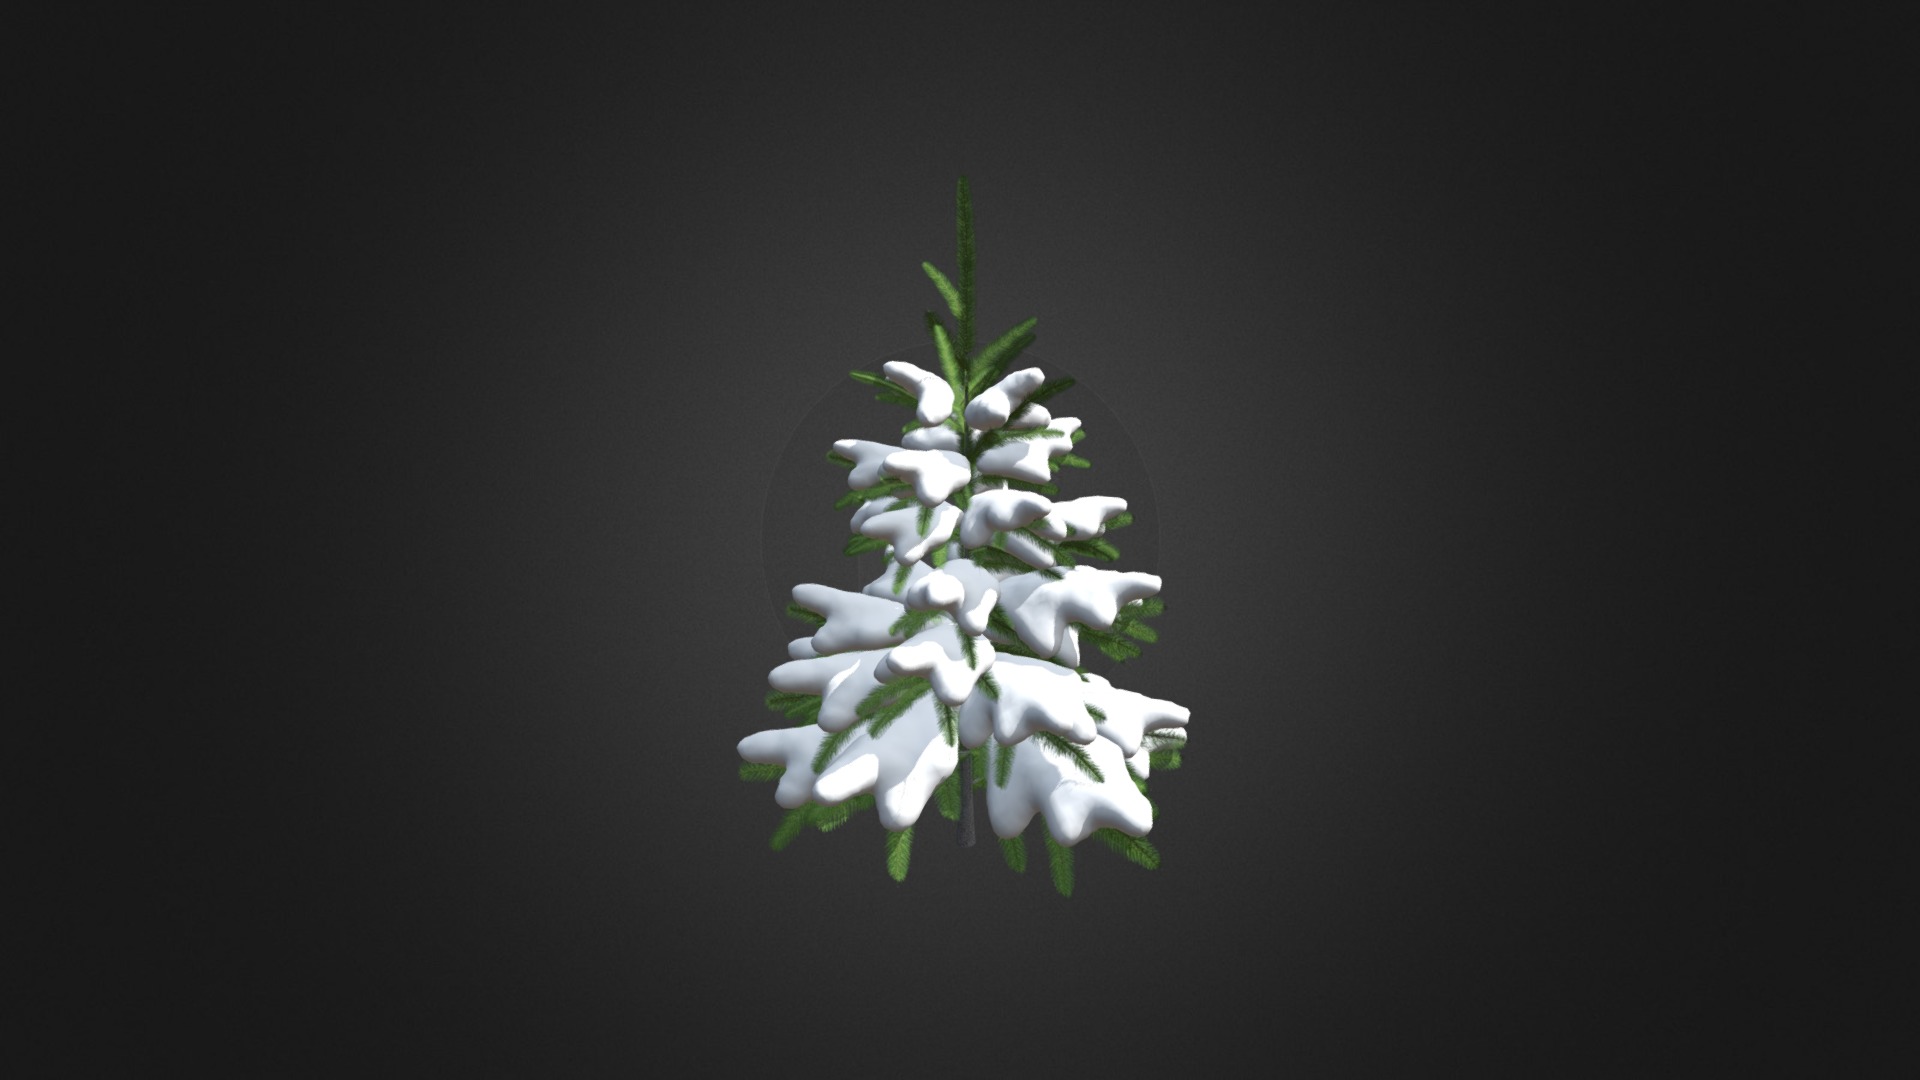 3D model Fir Tree with Snow 3D Model 0.8m - This is a 3D model of the Fir Tree with Snow 3D Model 0.8m. The 3D model is about a white flower with green leaves.